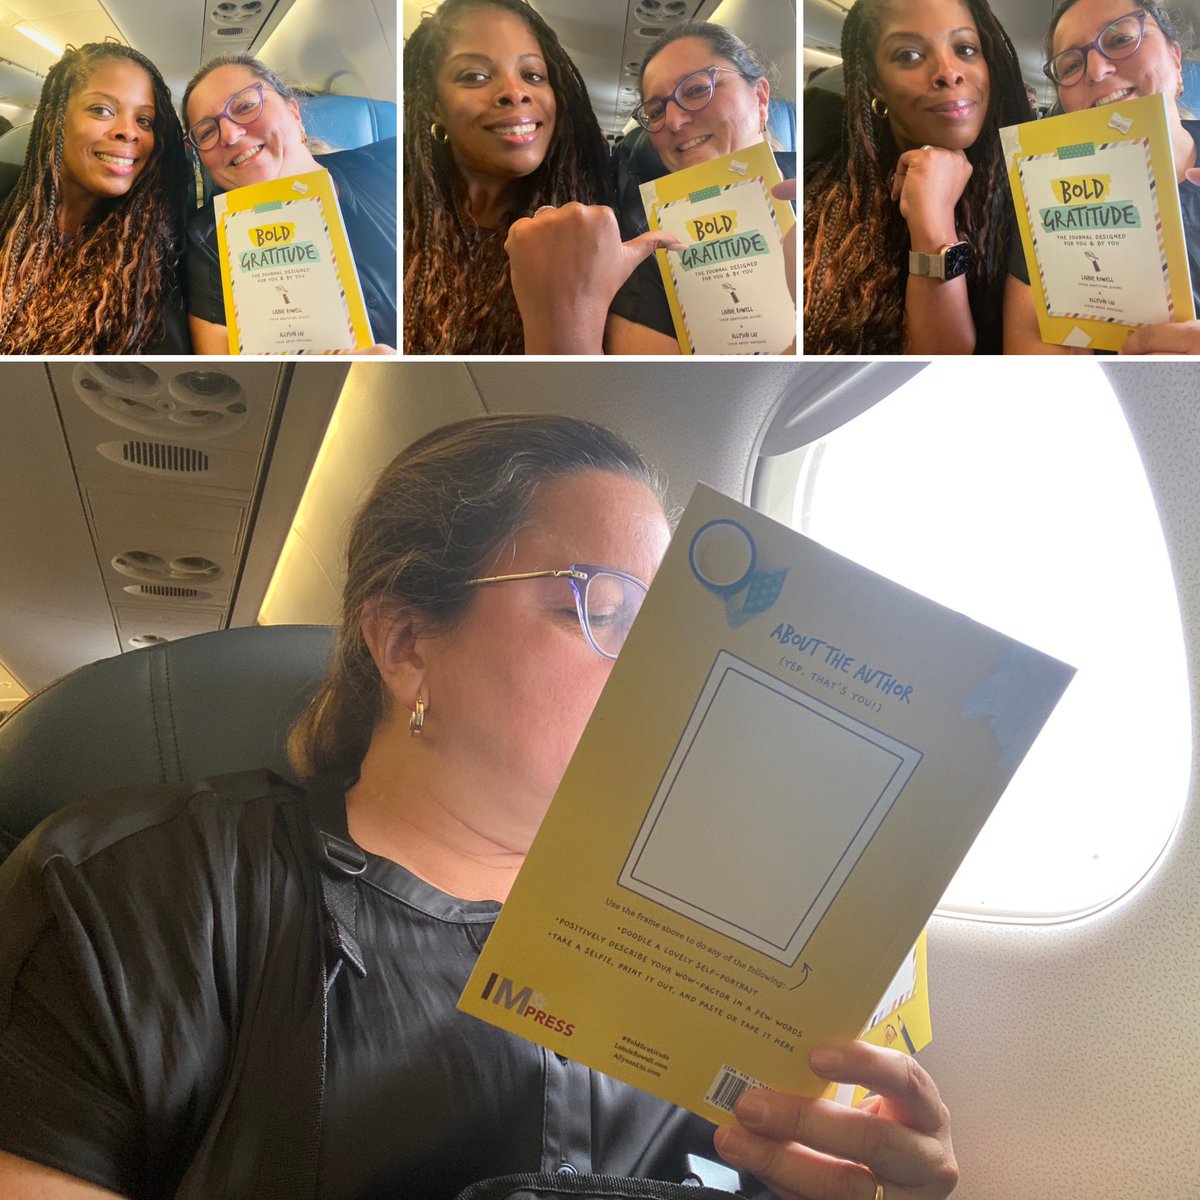 Had an awesome flight back from Washington, DC! @xilento & I reflected on the blessing/gift we received from this trip #NorthStar @NMAAHC #TeacherWorkshop @LainieRowell #EvolvingWithGratitude #BoldGratitude (p.31)